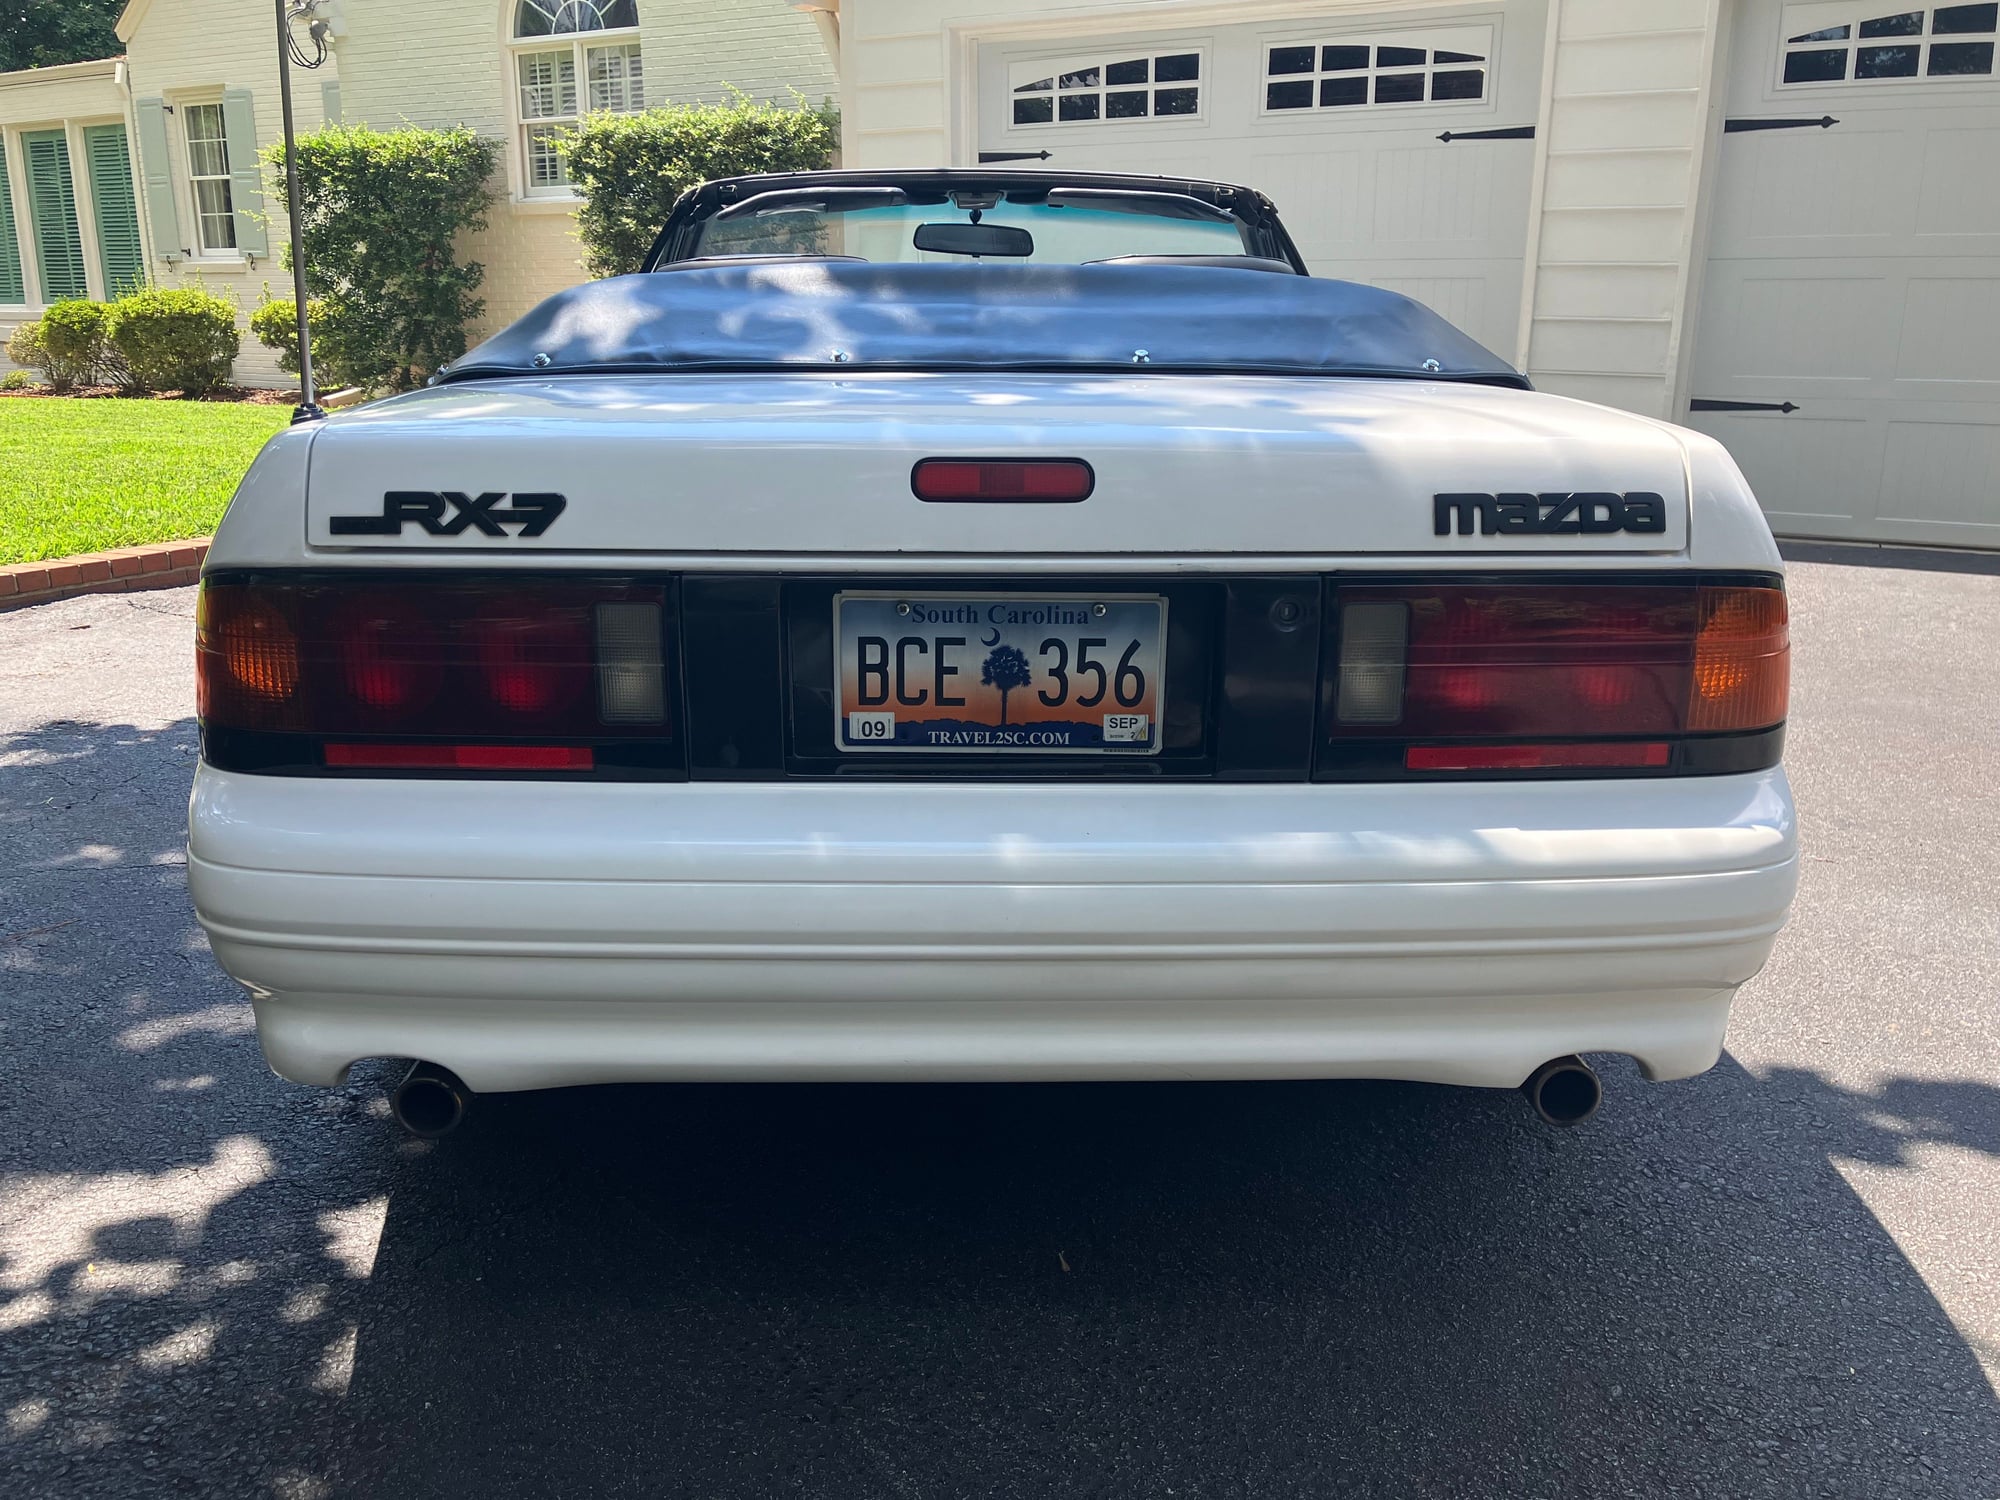 1991 Mazda RX-7 - 1991 RX7 Convertible - Used - VIN JM1FC3520M0903350 - Other - 2WD - Manual - Convertible - White - Columbia, SC 29205, United States